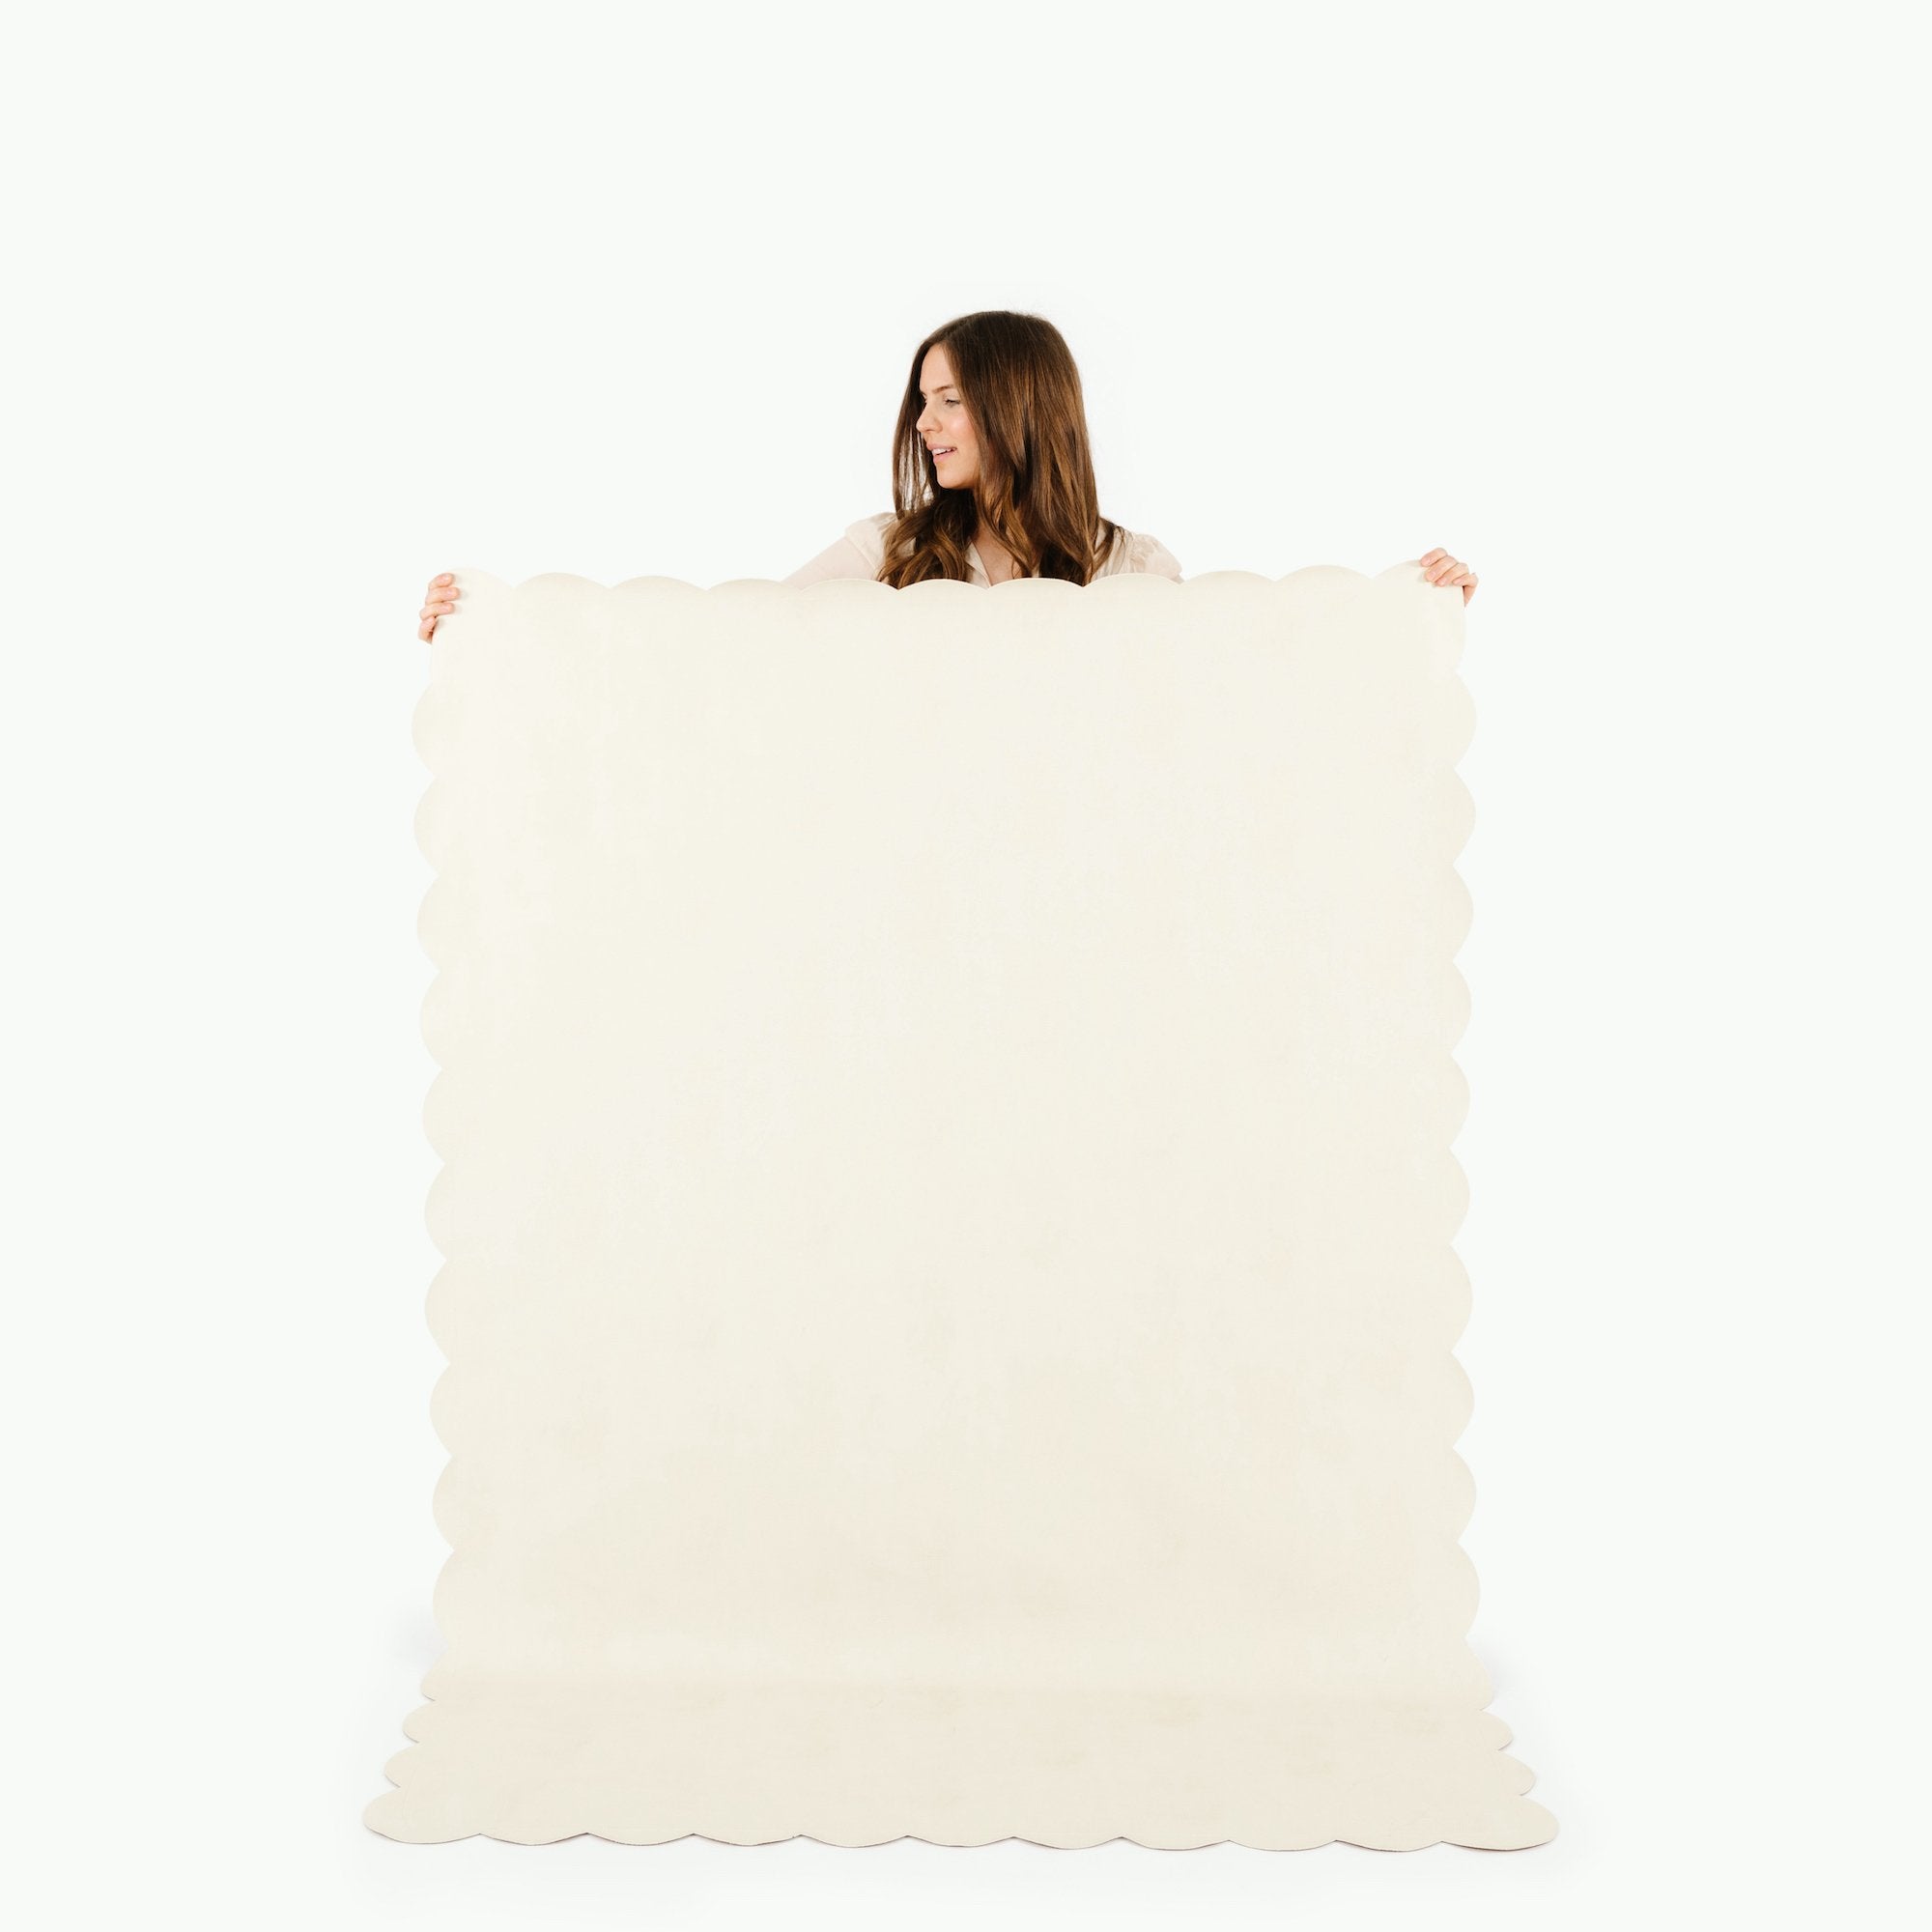 Ivory Scallop / 6 Foot@woman holding up ivory scallop tablecloth